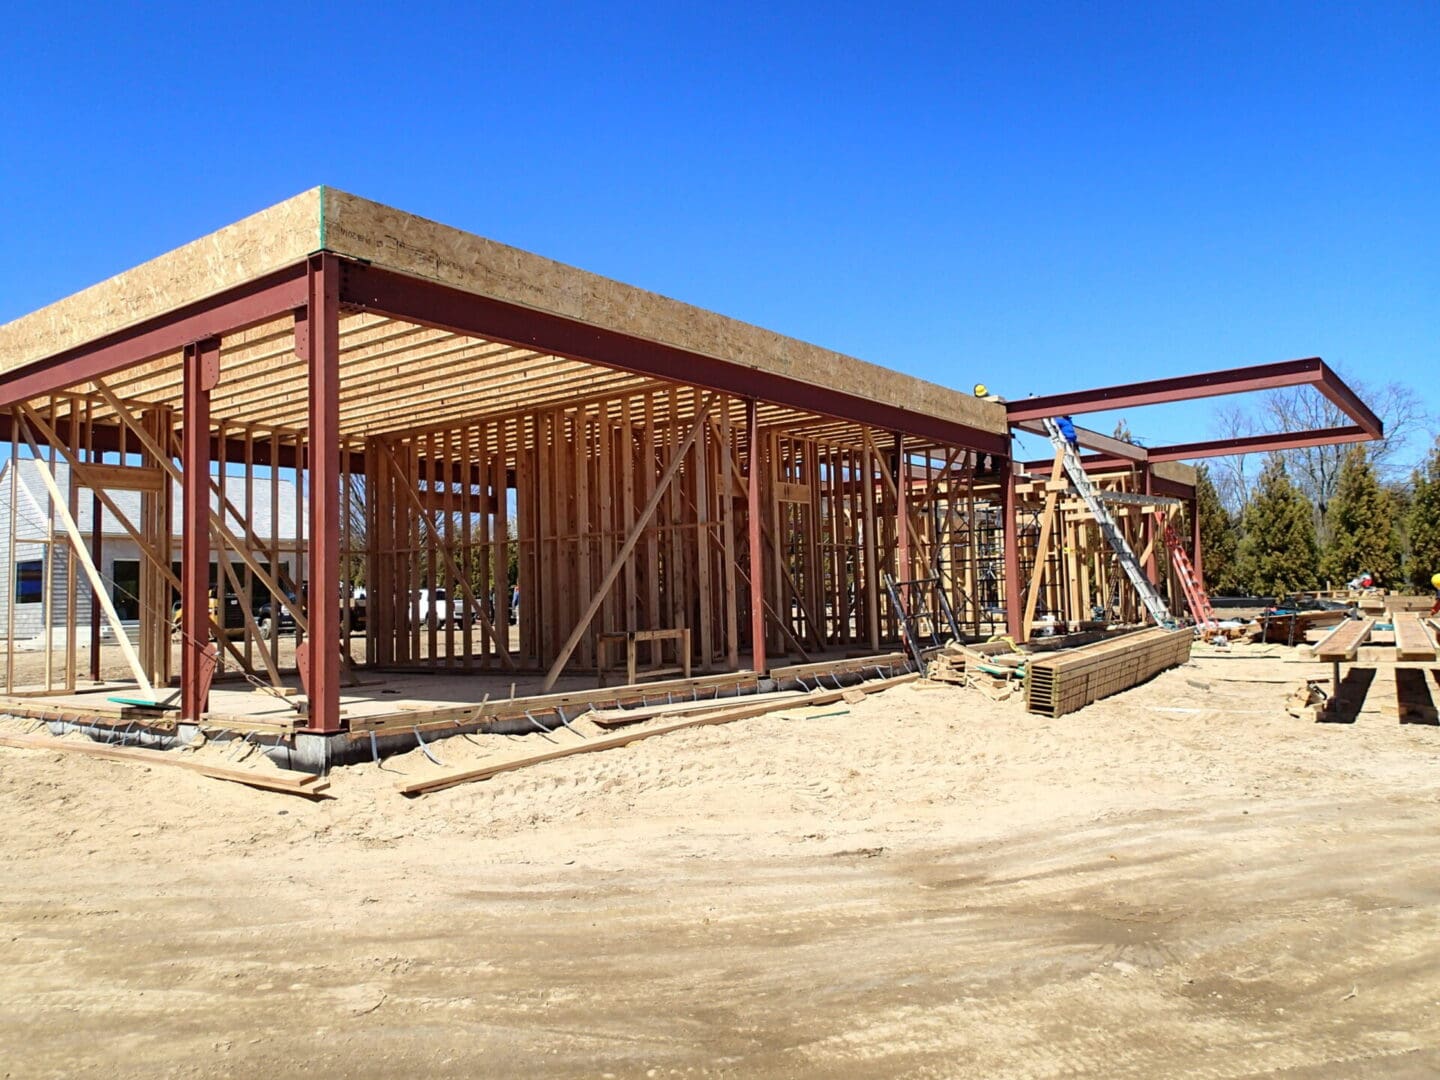 A building under construction with some wood framing.